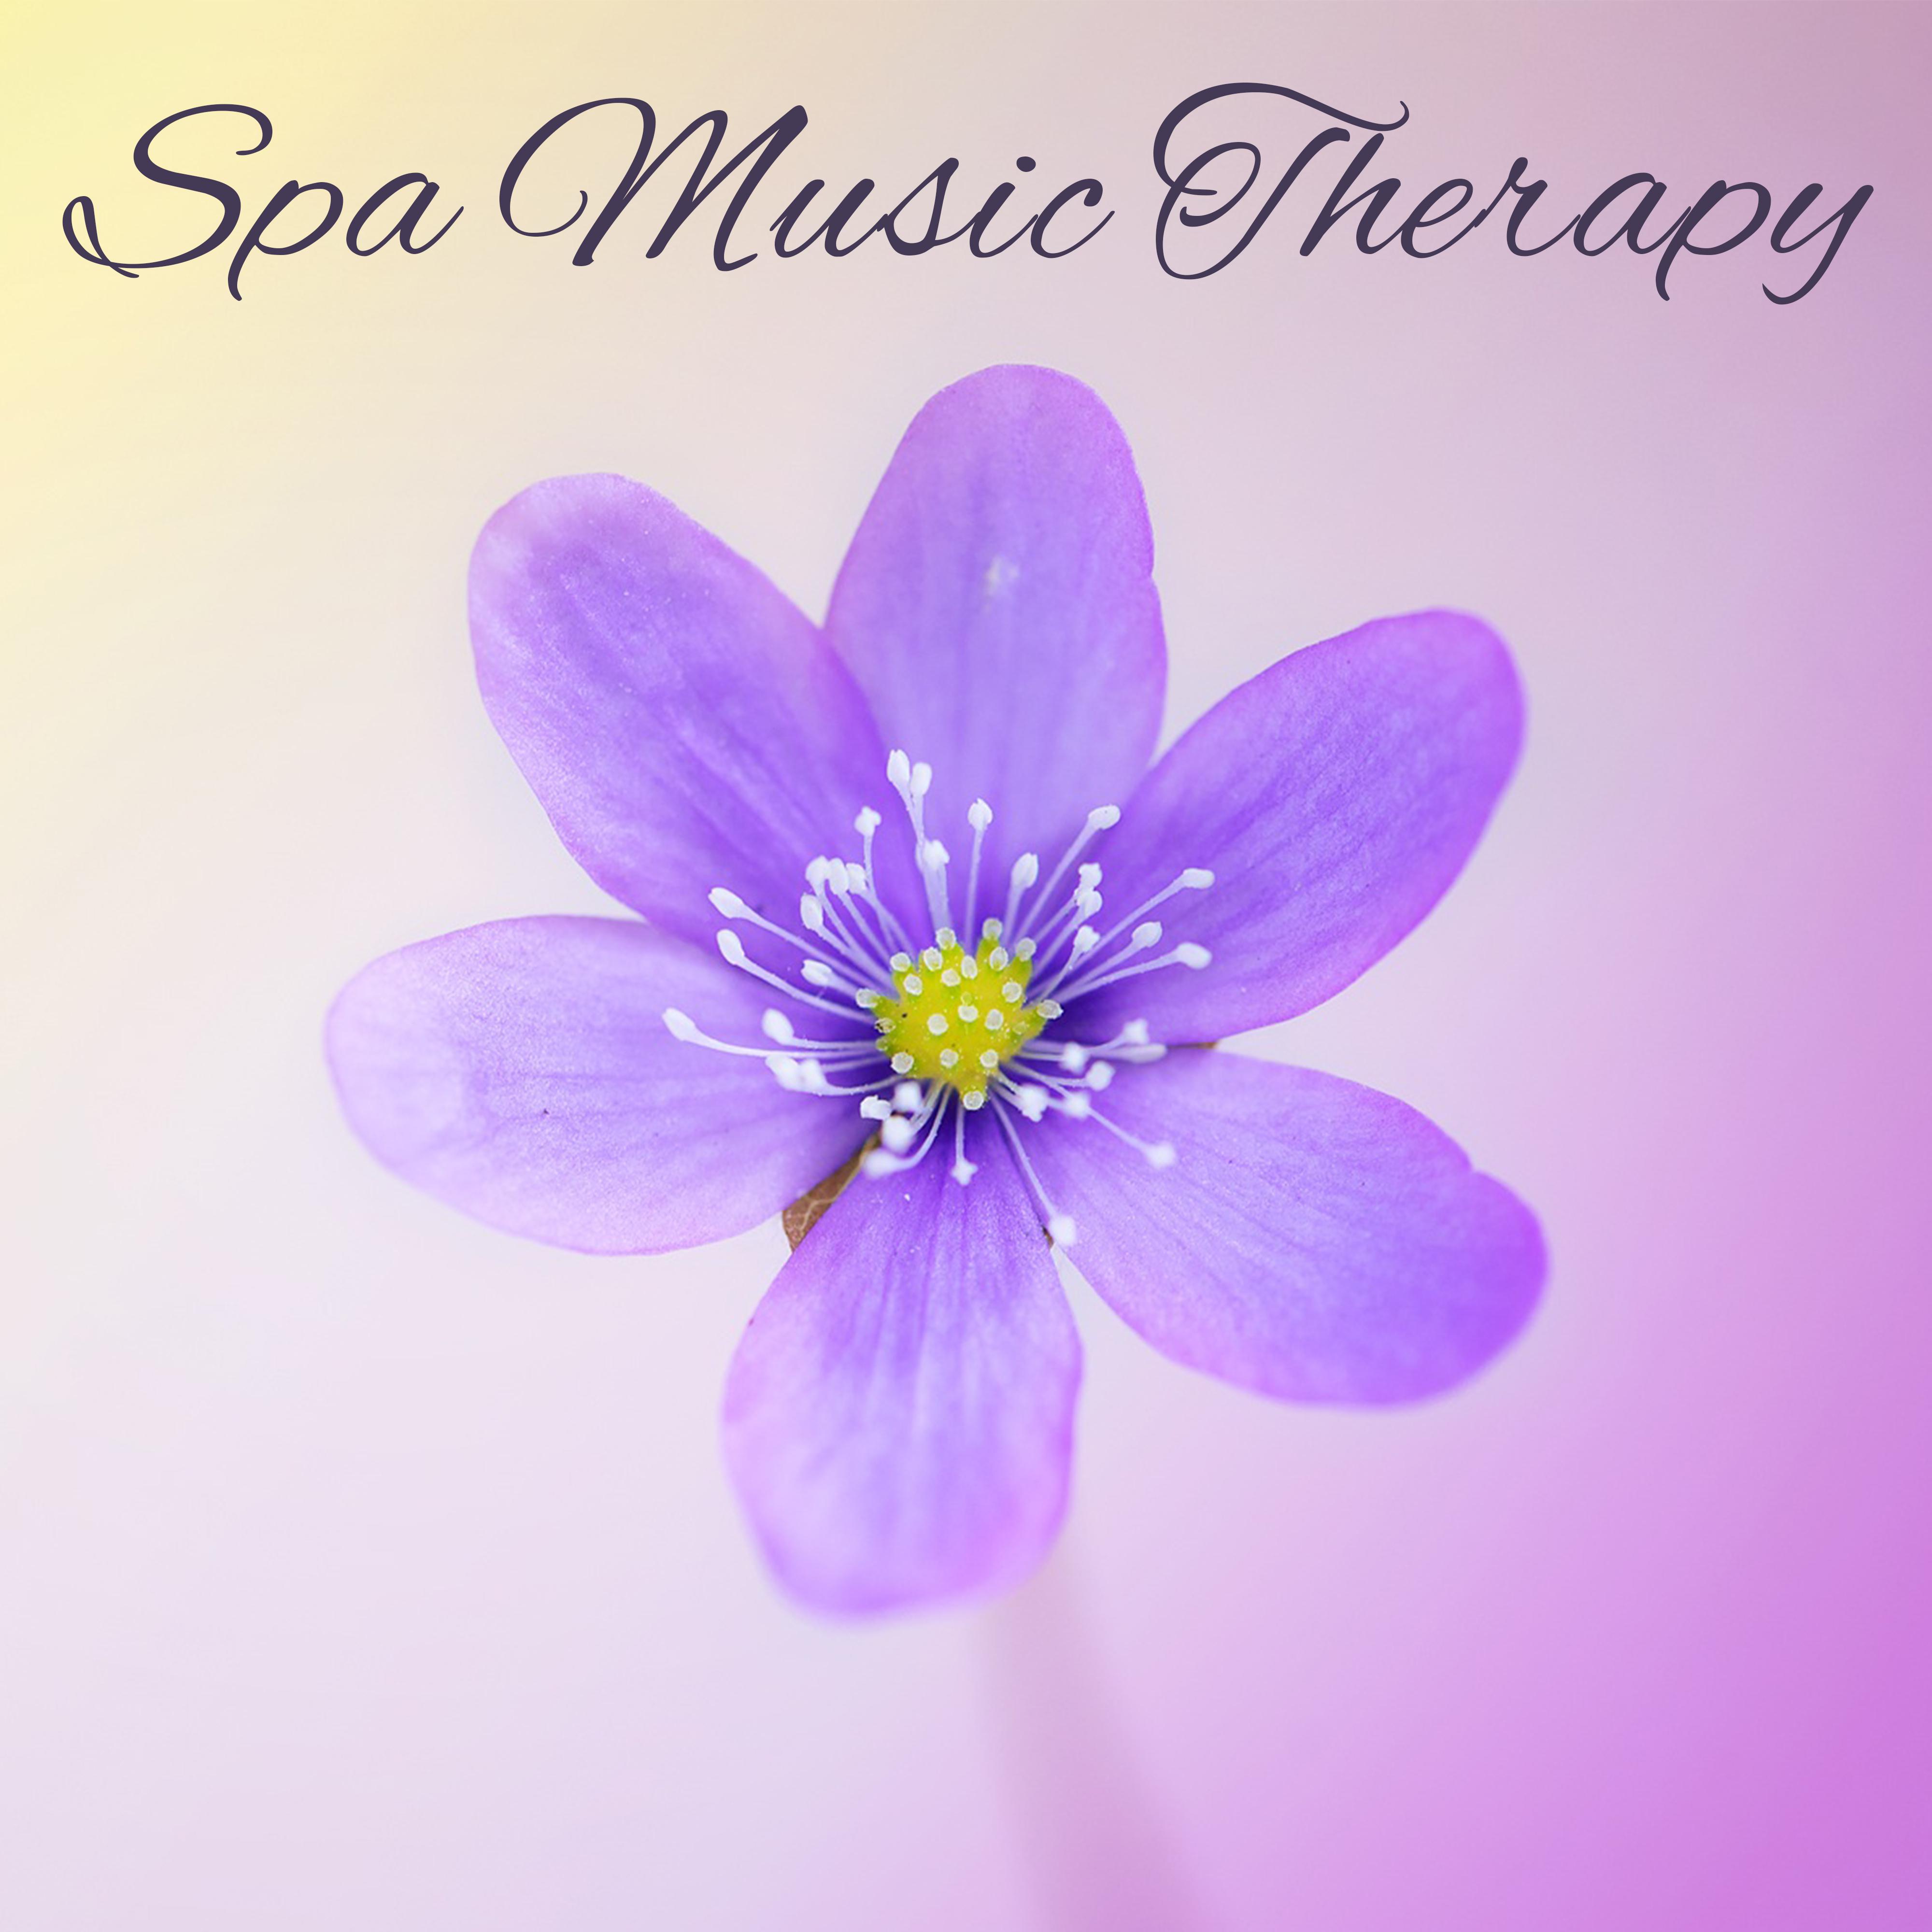 Spa Music Therapy  Relaxing Music, Calming Sounds of Nature, Mental Calm, Positive Thinking